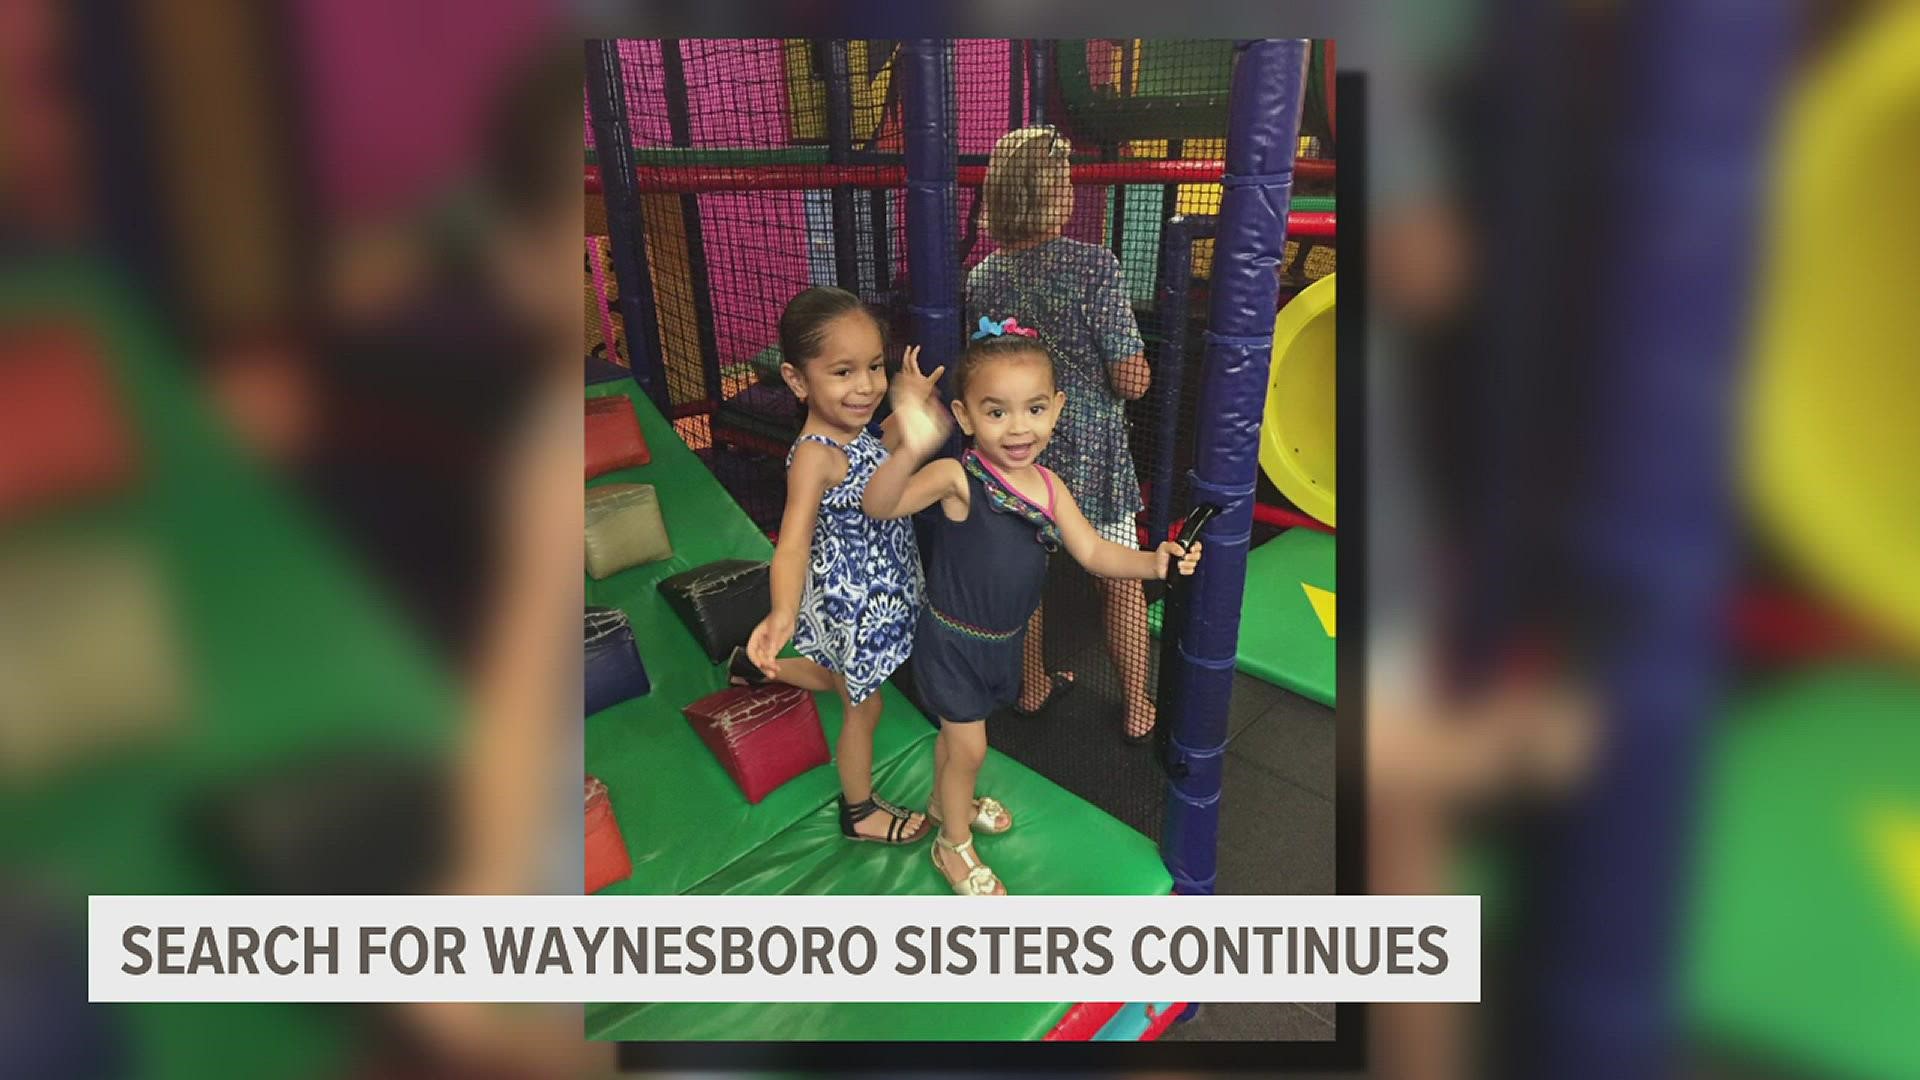 Skye Rex and Hanna Lee were allegedly taken from their Waynesboro home by their own mother in March of 2020, after a judge granted their father custody of them.